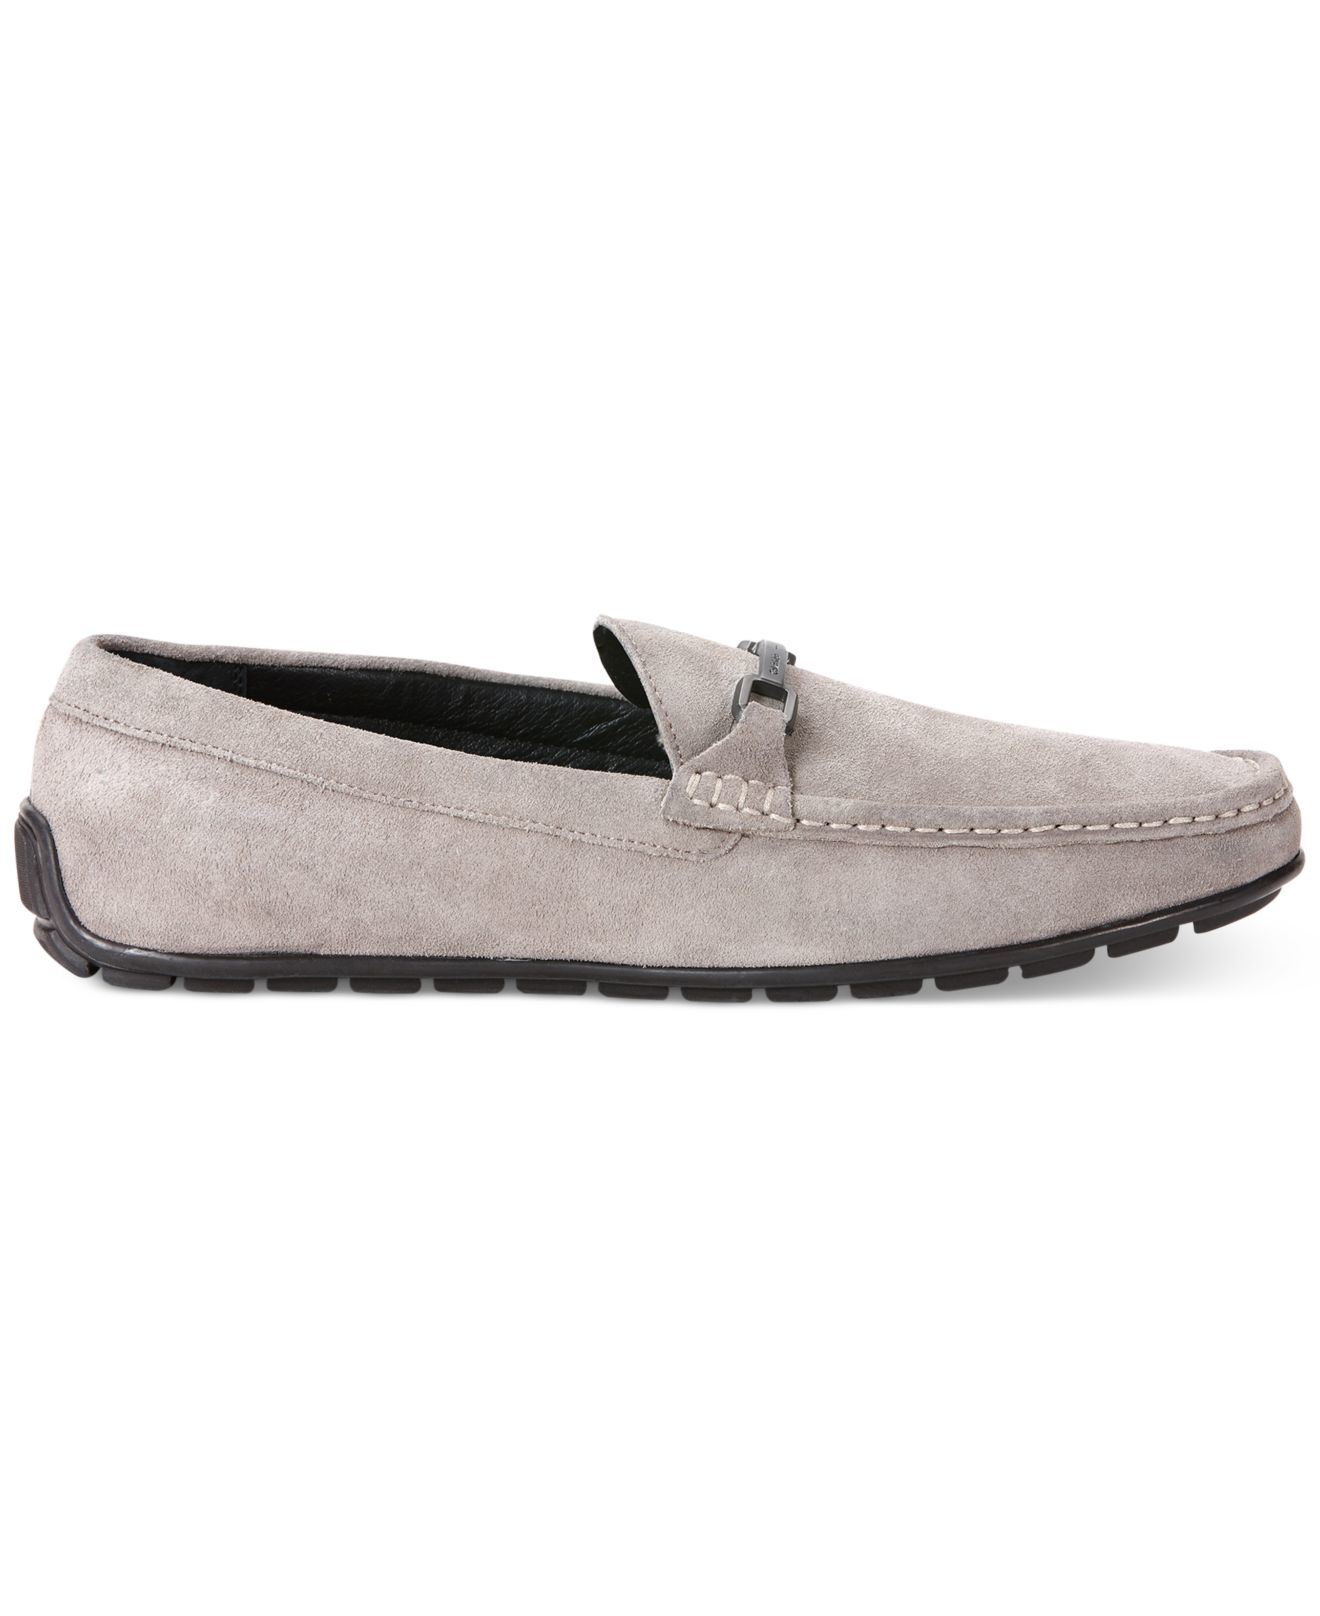 Lyst - Calvin Klein Isley Suede Loafers in Gray for Men